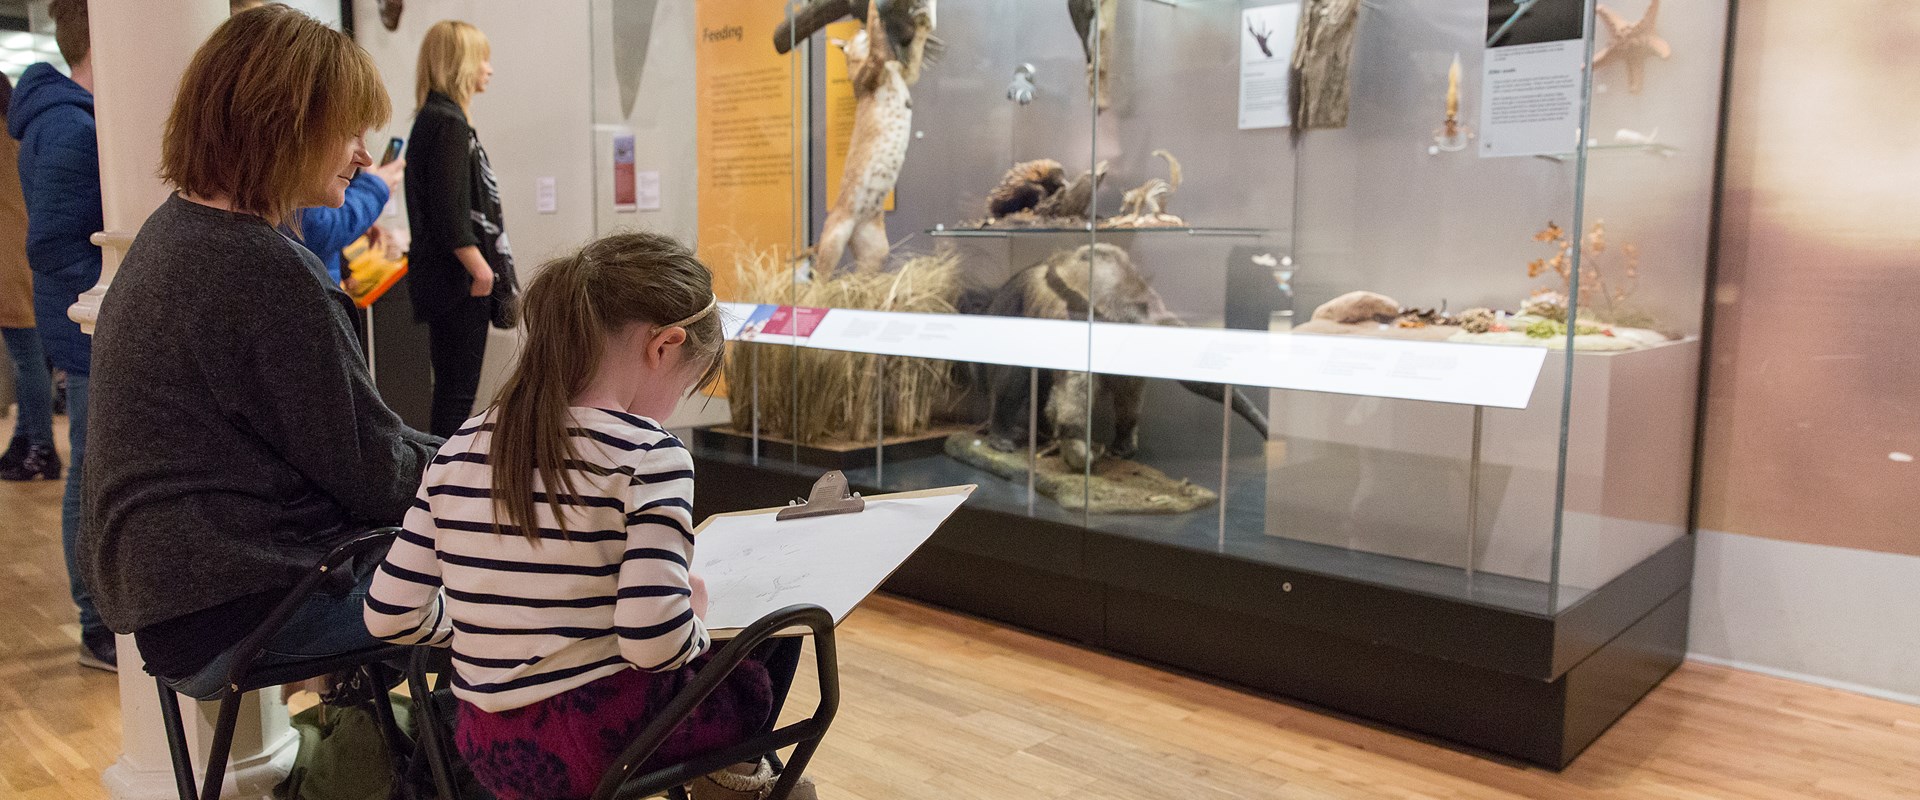 An adult and a child sit on stools sketching infront of a case of taxidermy.